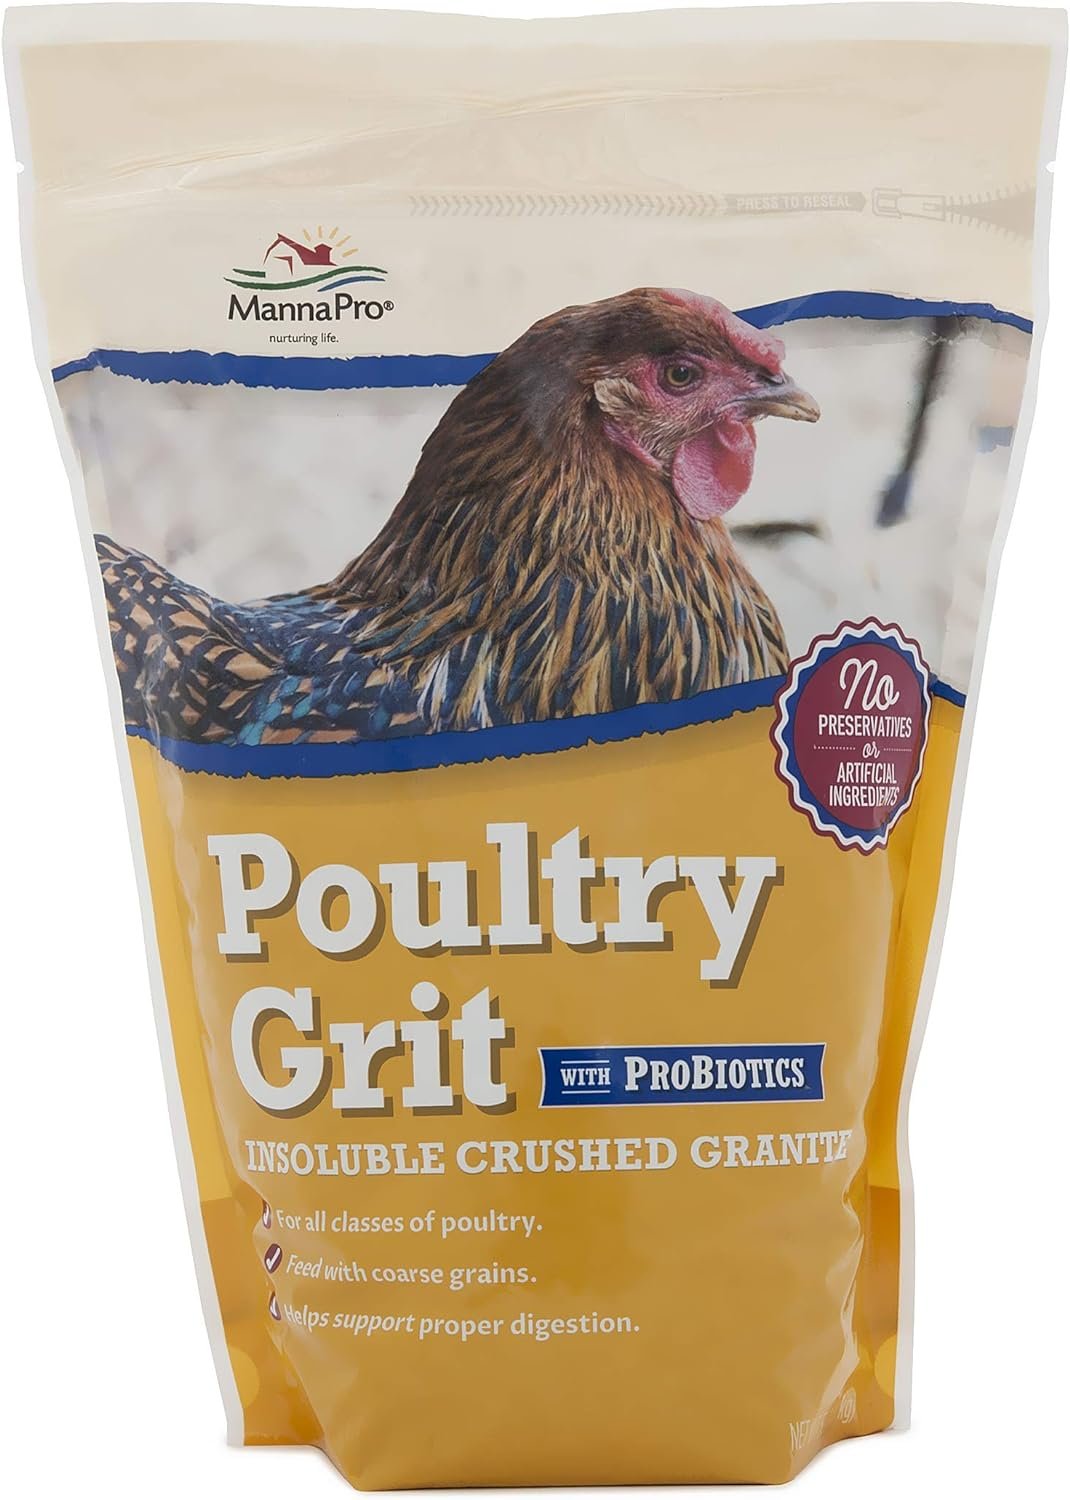 Manna Pro Poultry Grit with Probiotics | Insoluble Crushed Granite | 5 LB  Crushed Oyster Shell - Calcium Supplement for Laying Hens - Chicken Feed for Egg-Laying Chickens - 5 lbs